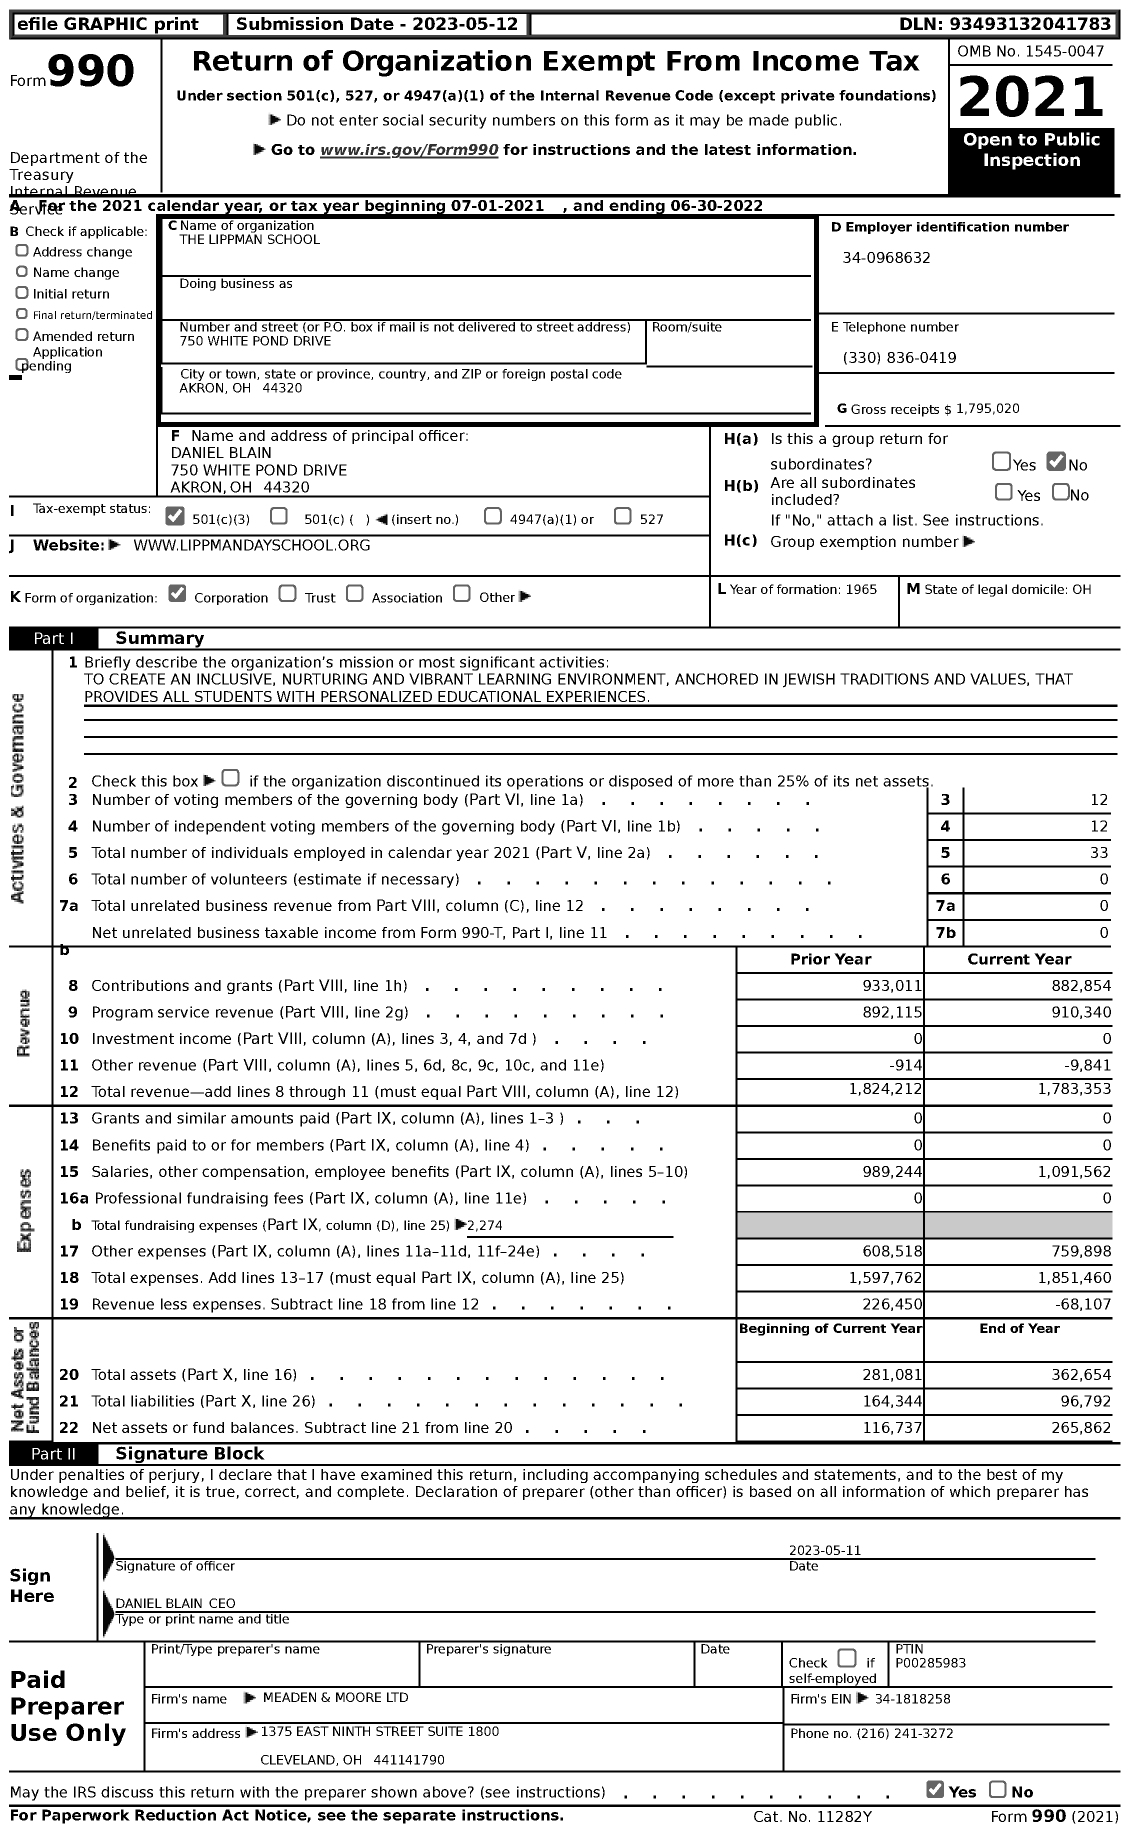 Image of first page of 2021 Form 990 for The Lippman School